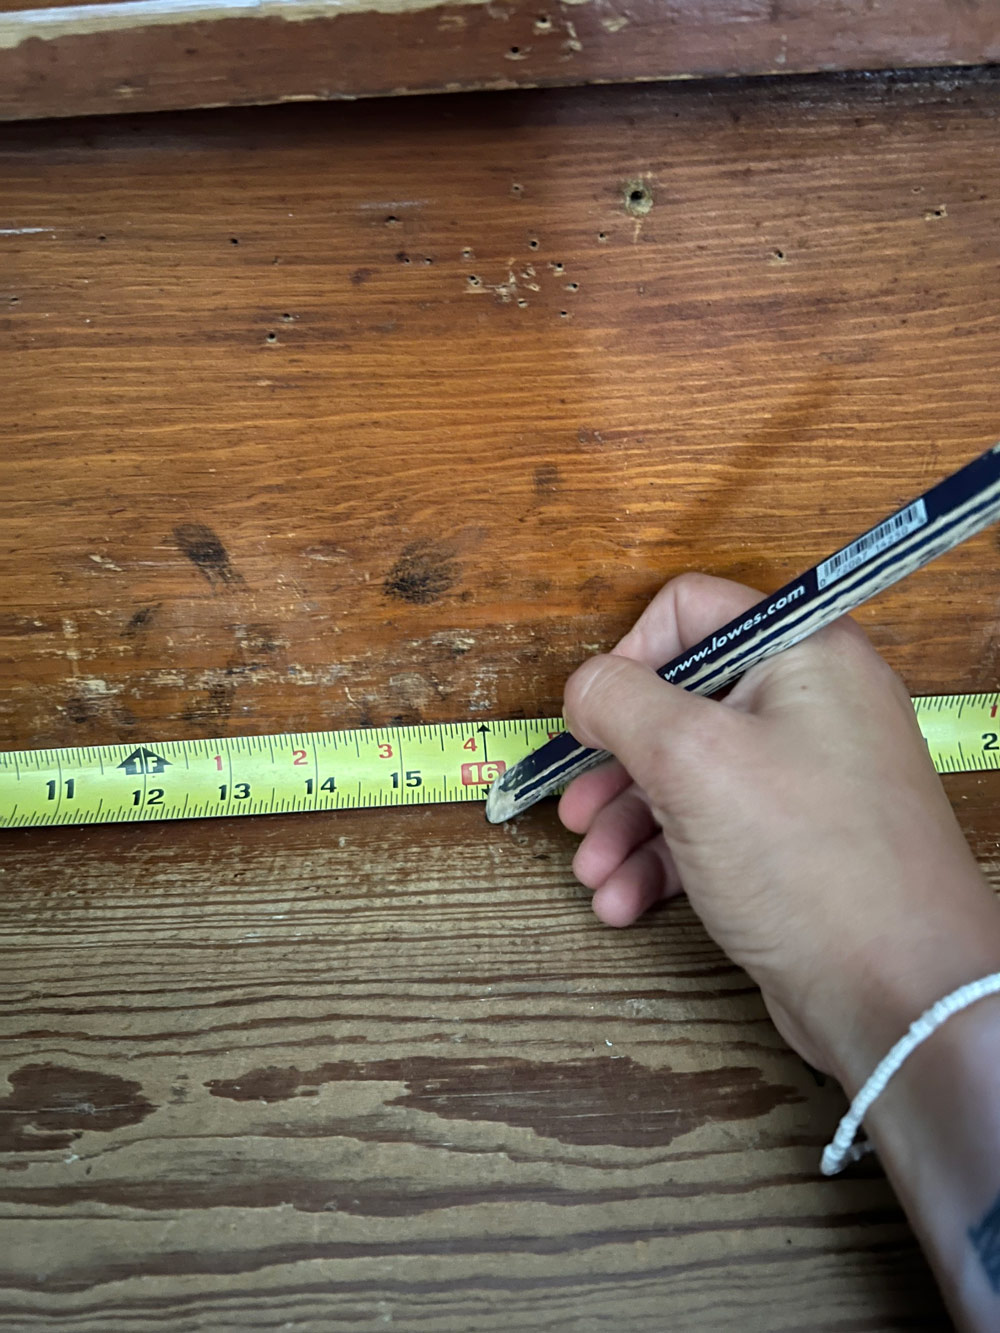 A person using a pencil and tape measure.